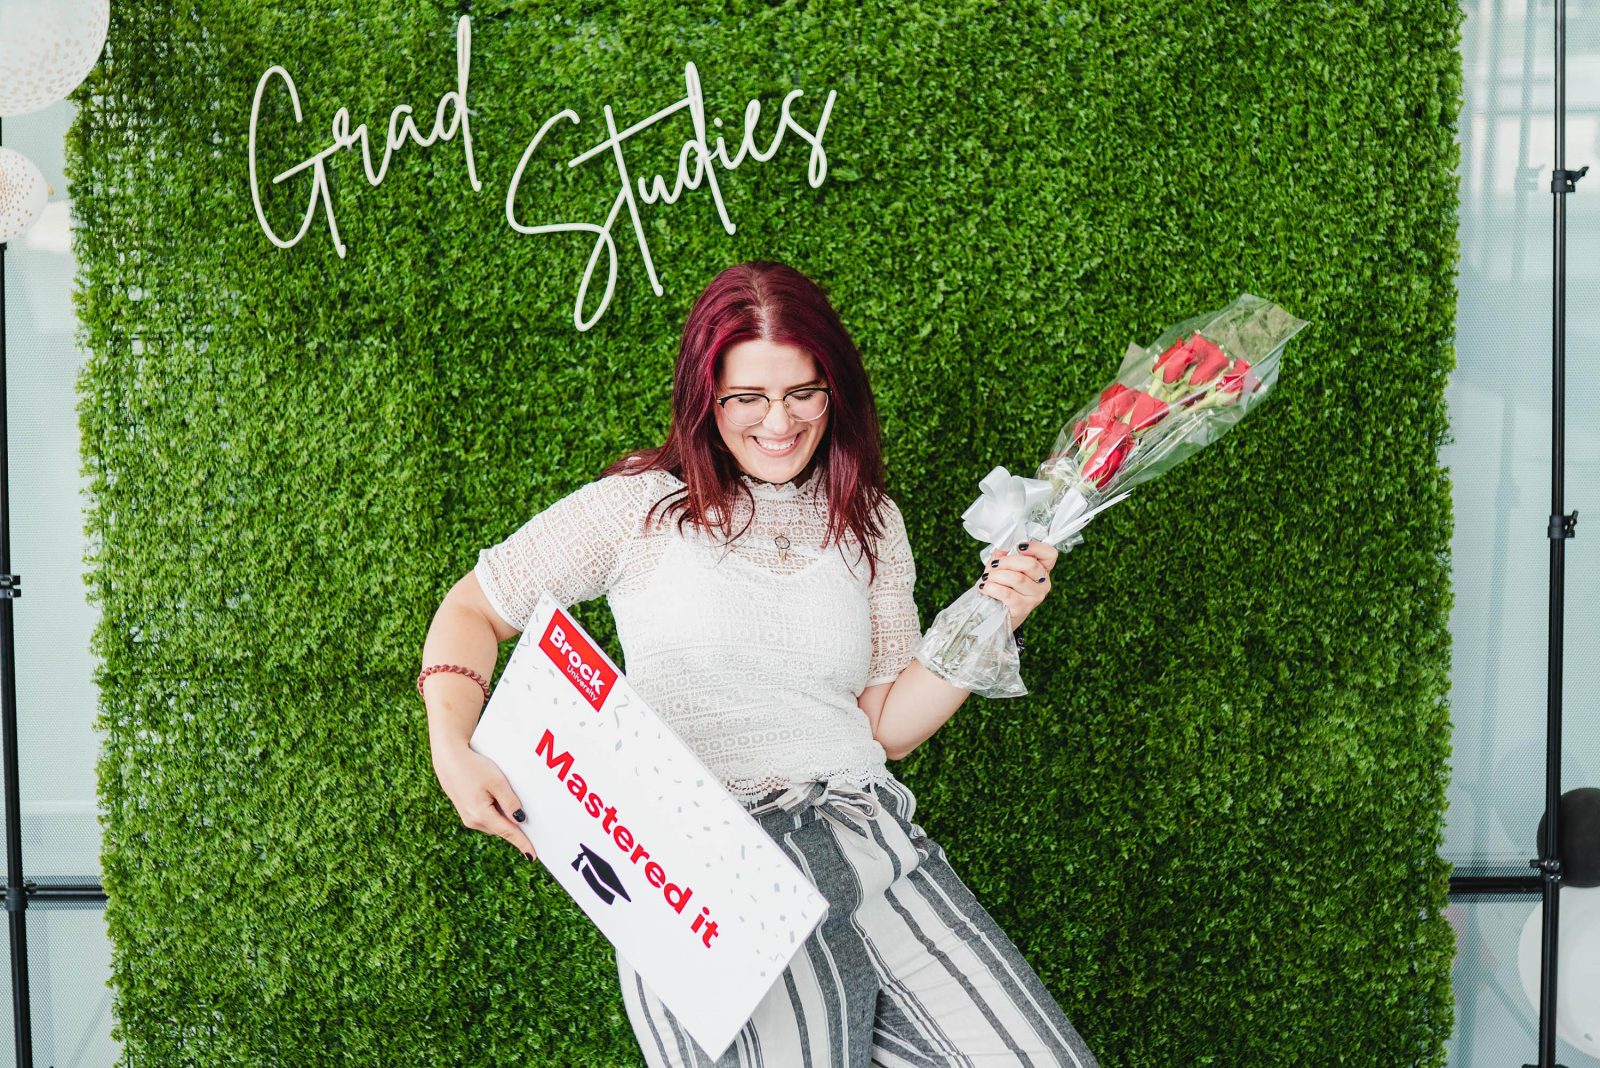 A Brock University graduate student celebrating while holding ‘Mastered it’ sign in front of faux green Graduate Studies photo backdrop during convocation celebration.